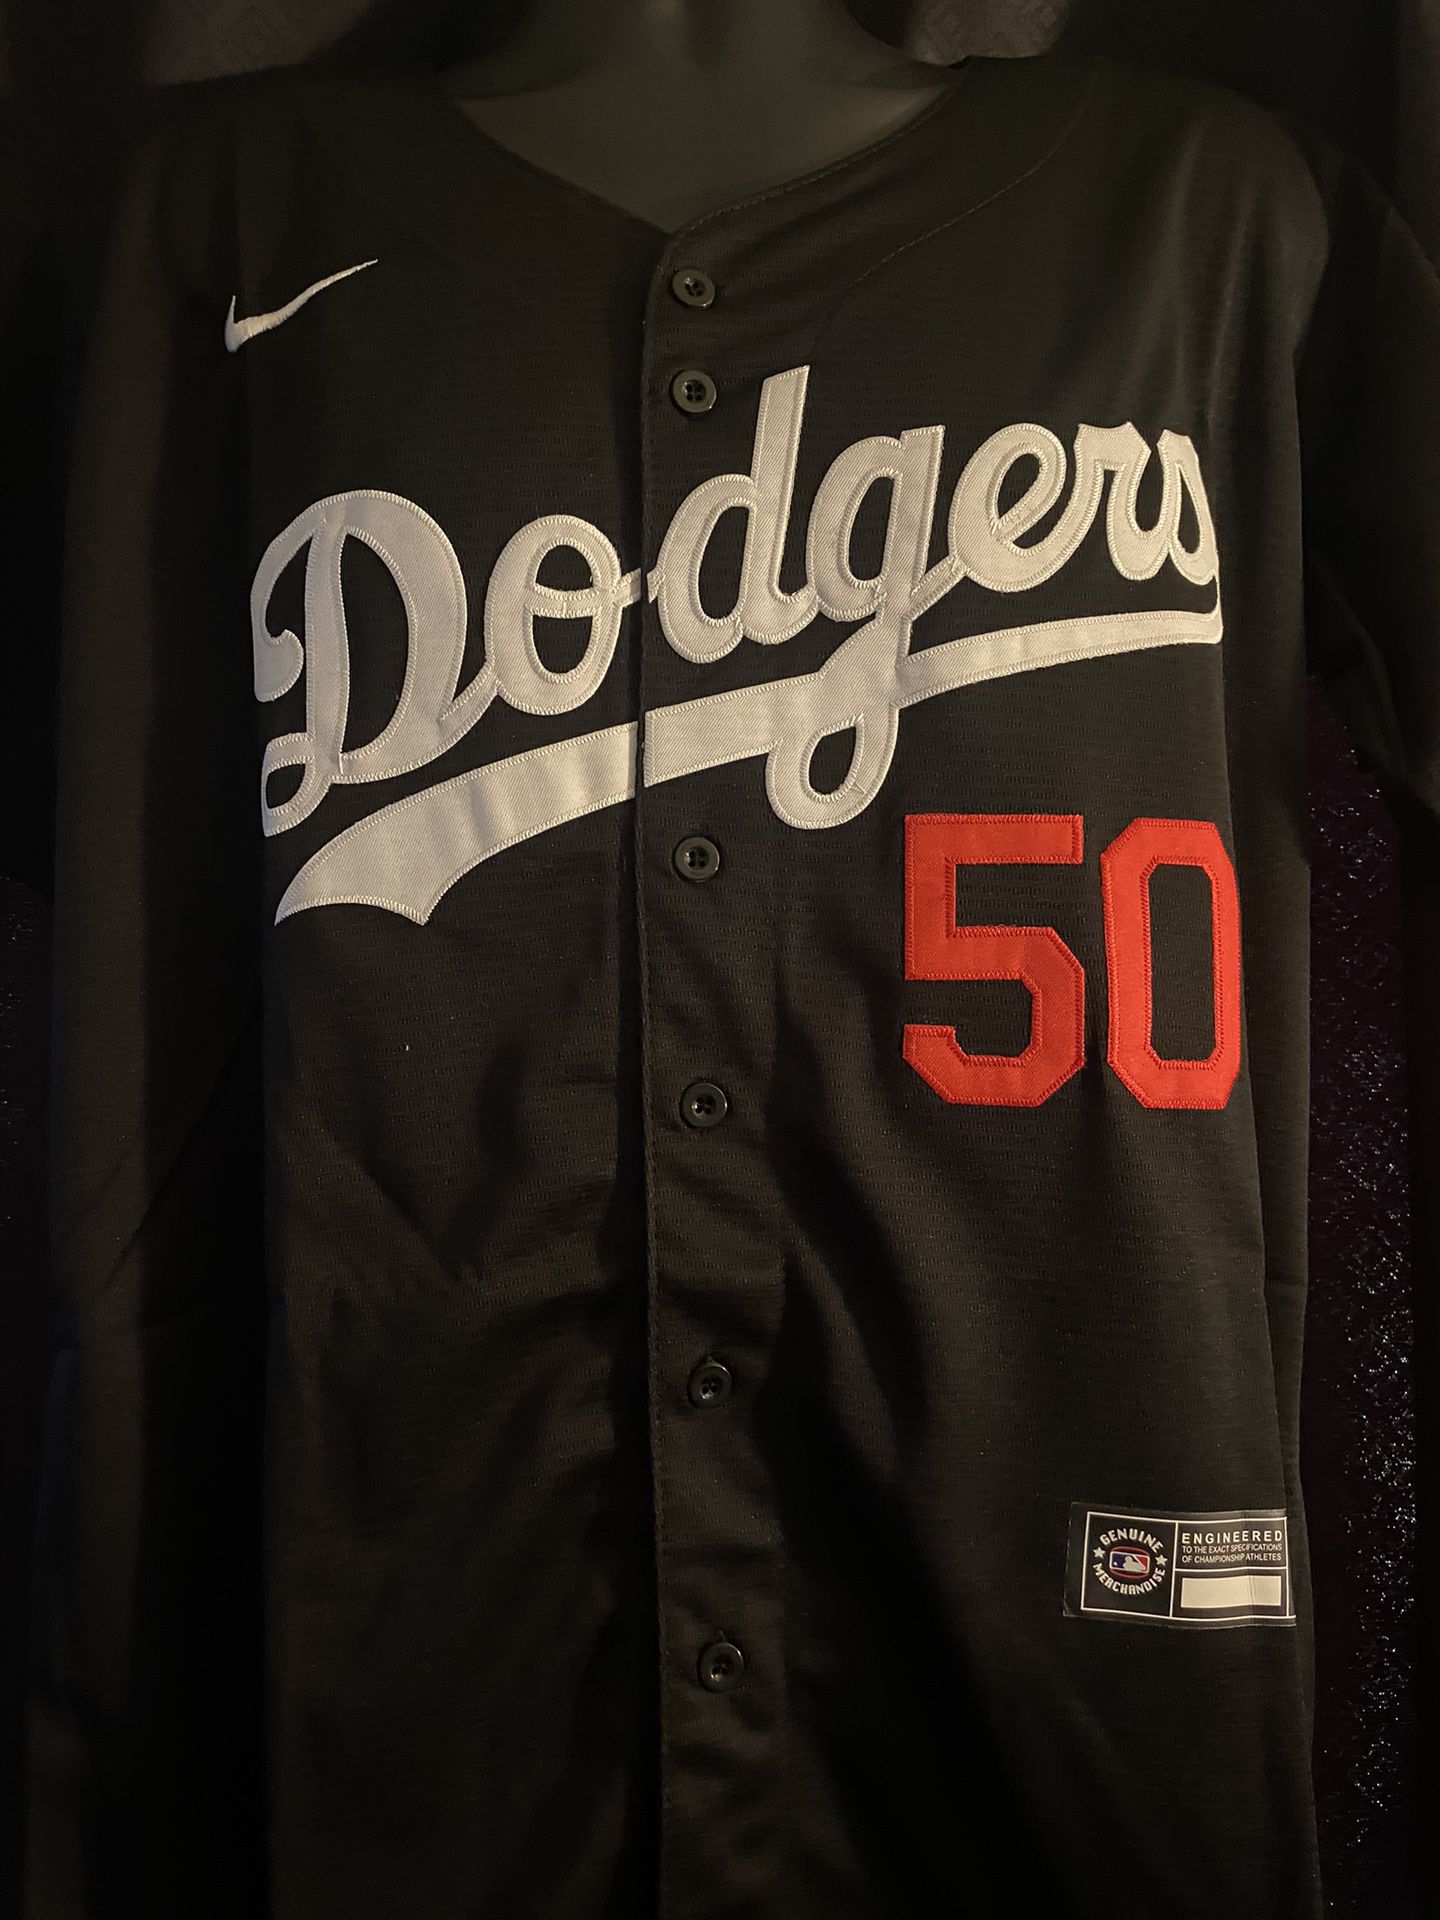 Youth Mookie Betts #50 Los Angeles Dodgers Nike Blue Black Jersey Small Medium Large X-Large